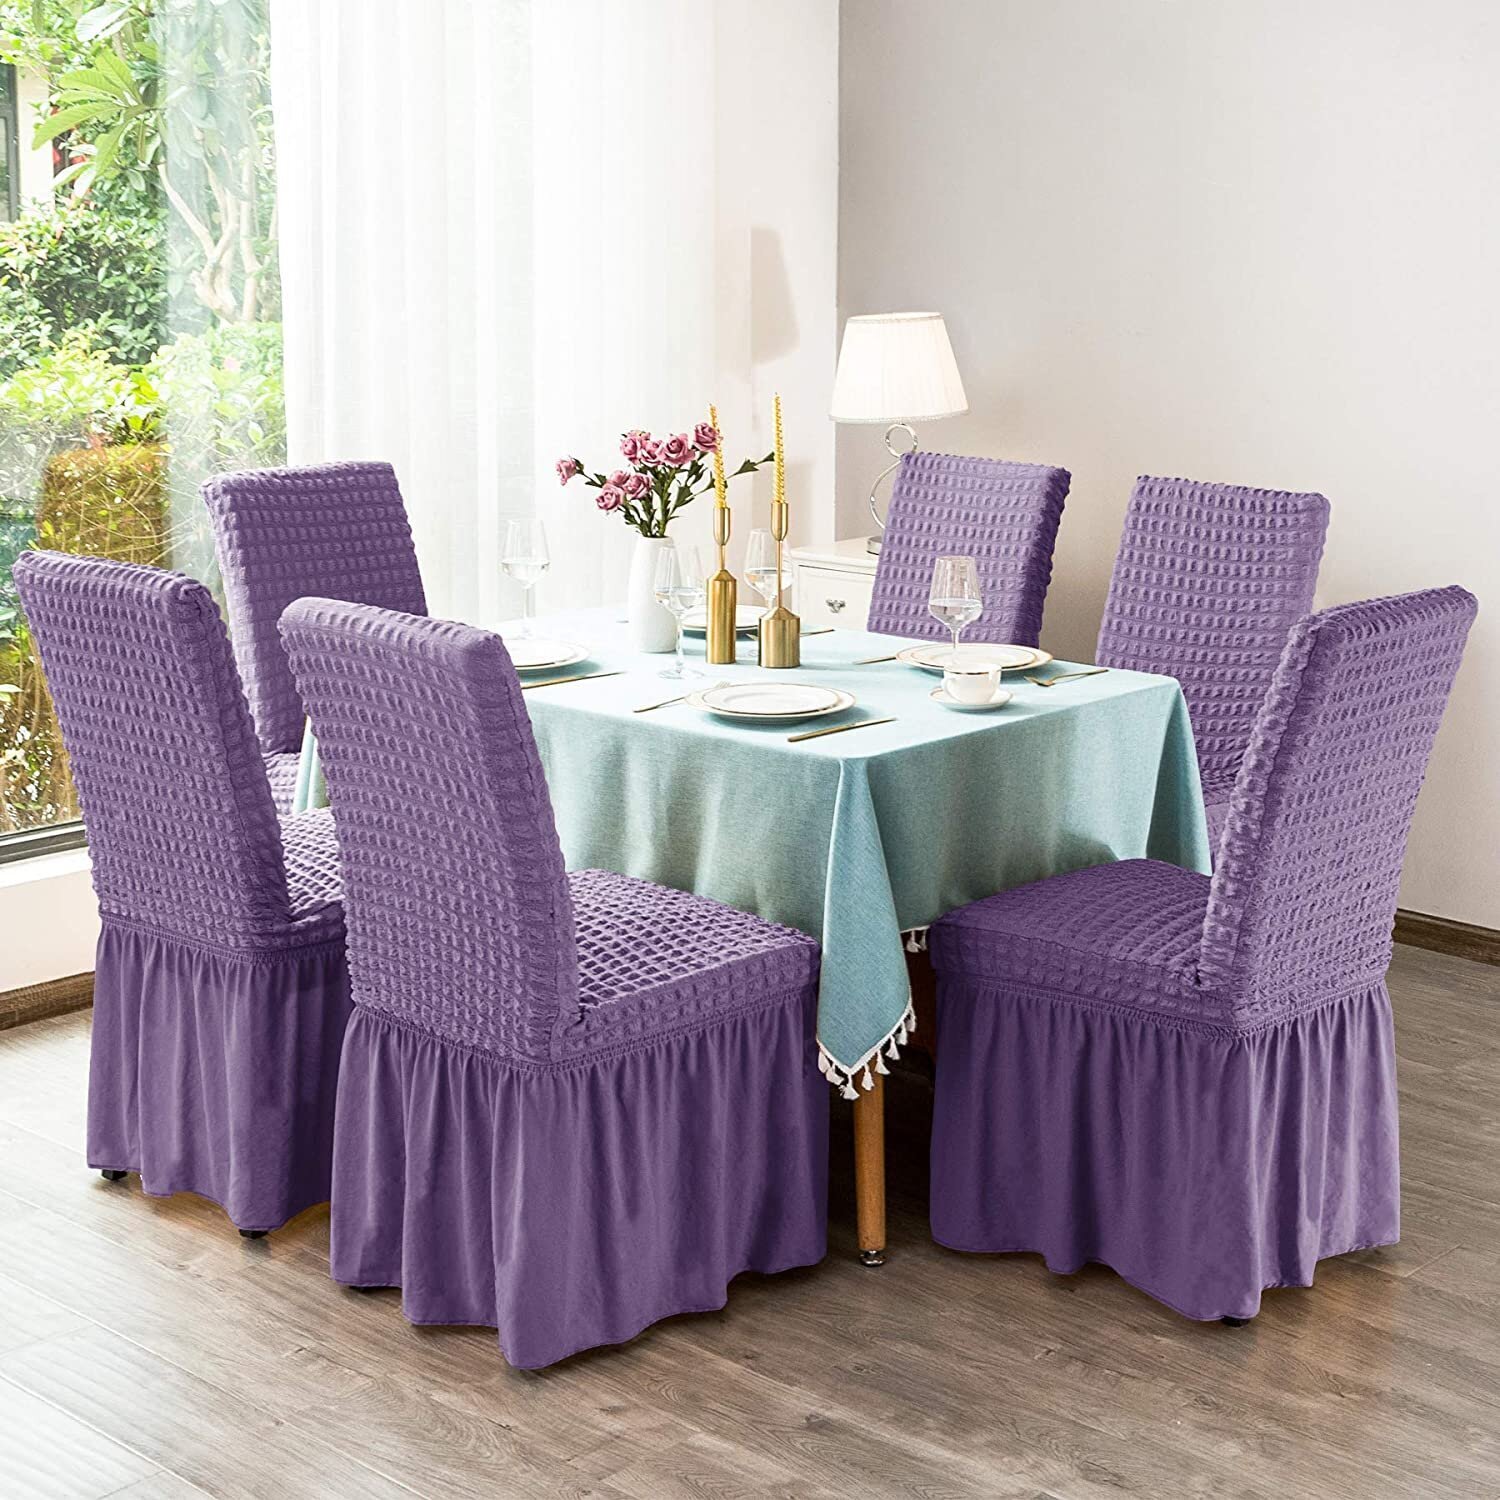 Dining Chair Slipcovers with Frilled Skirt